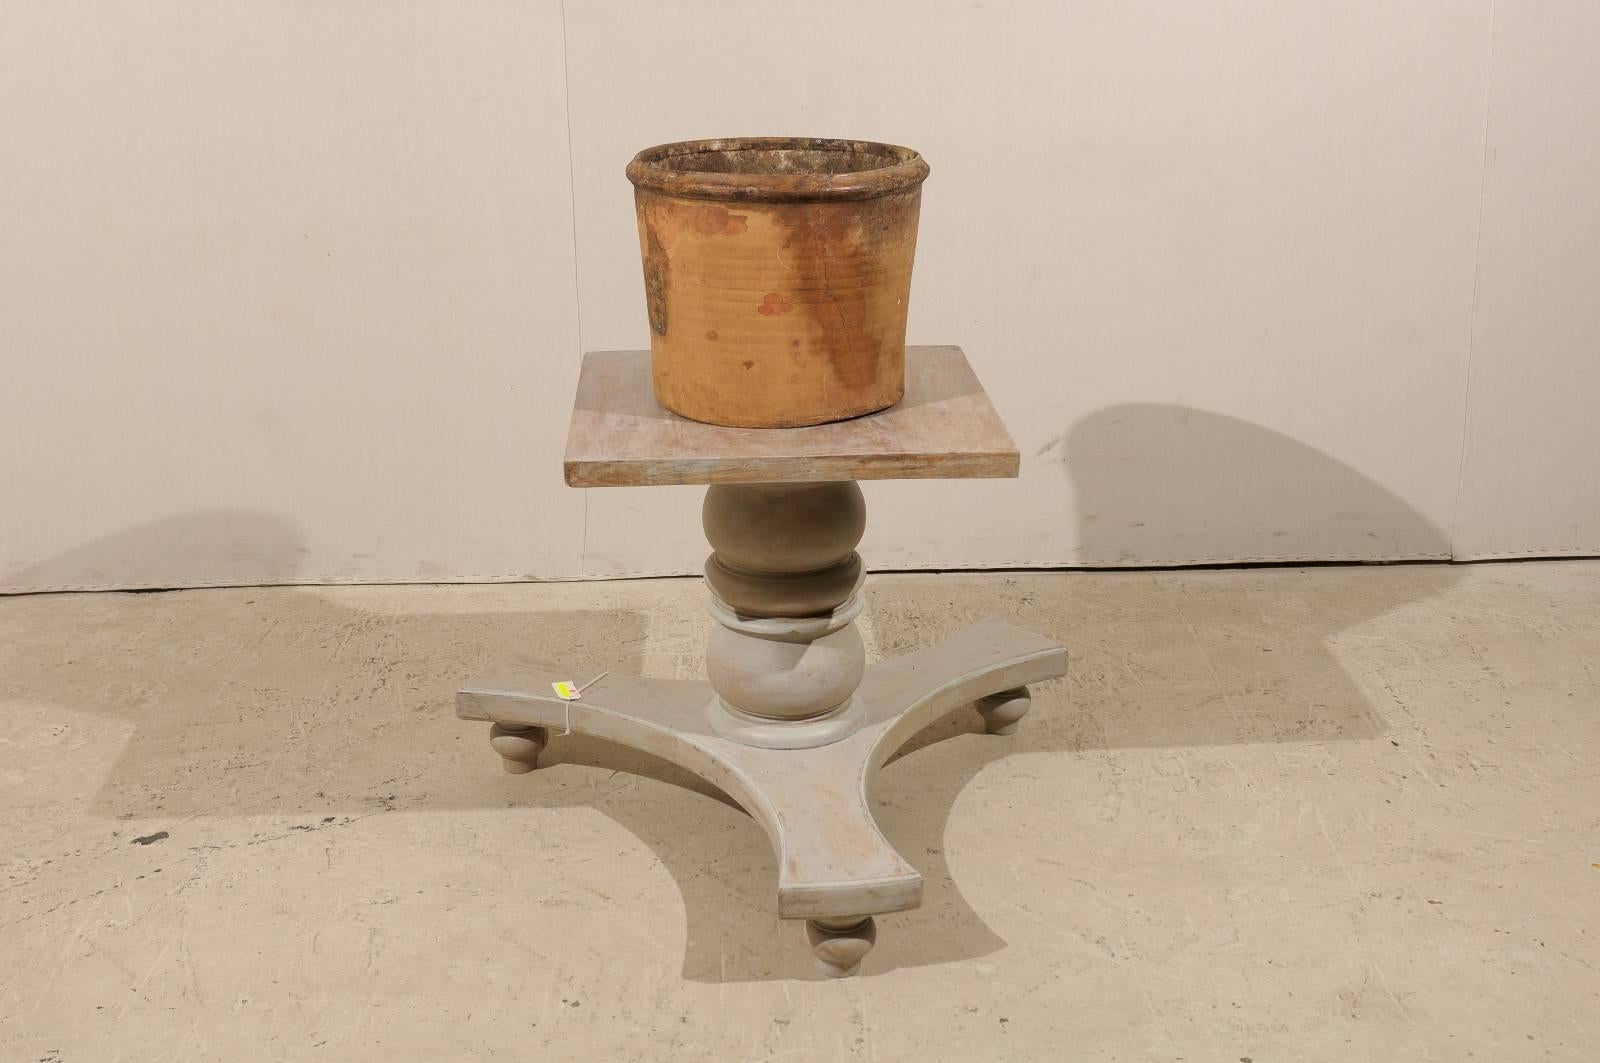 A Spanish aged clay pot from the 19th century. This Spanish clay pot features a spout at the base, great for draining. The general color is light brown color with some darker brown throughout.